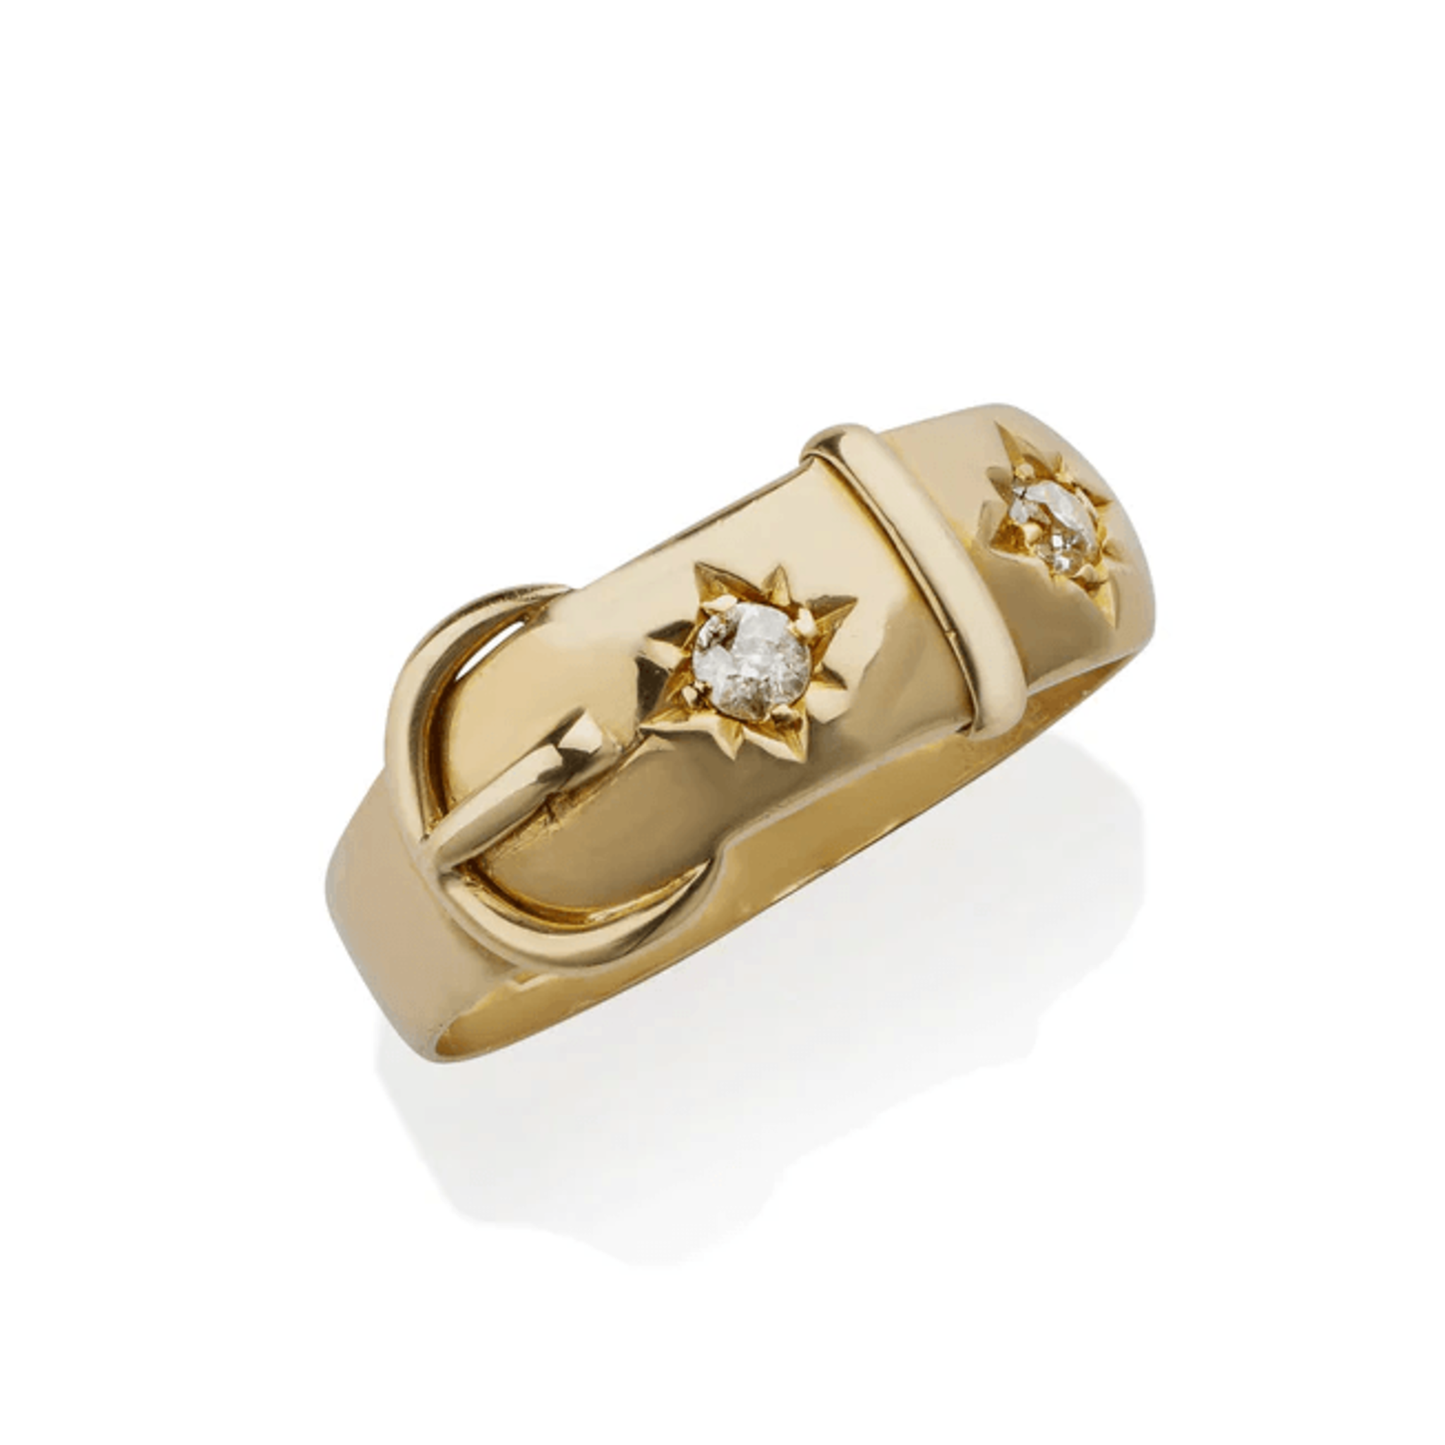 Post-1980s 18KT Yellow Gold Diamond Buckle Ring front